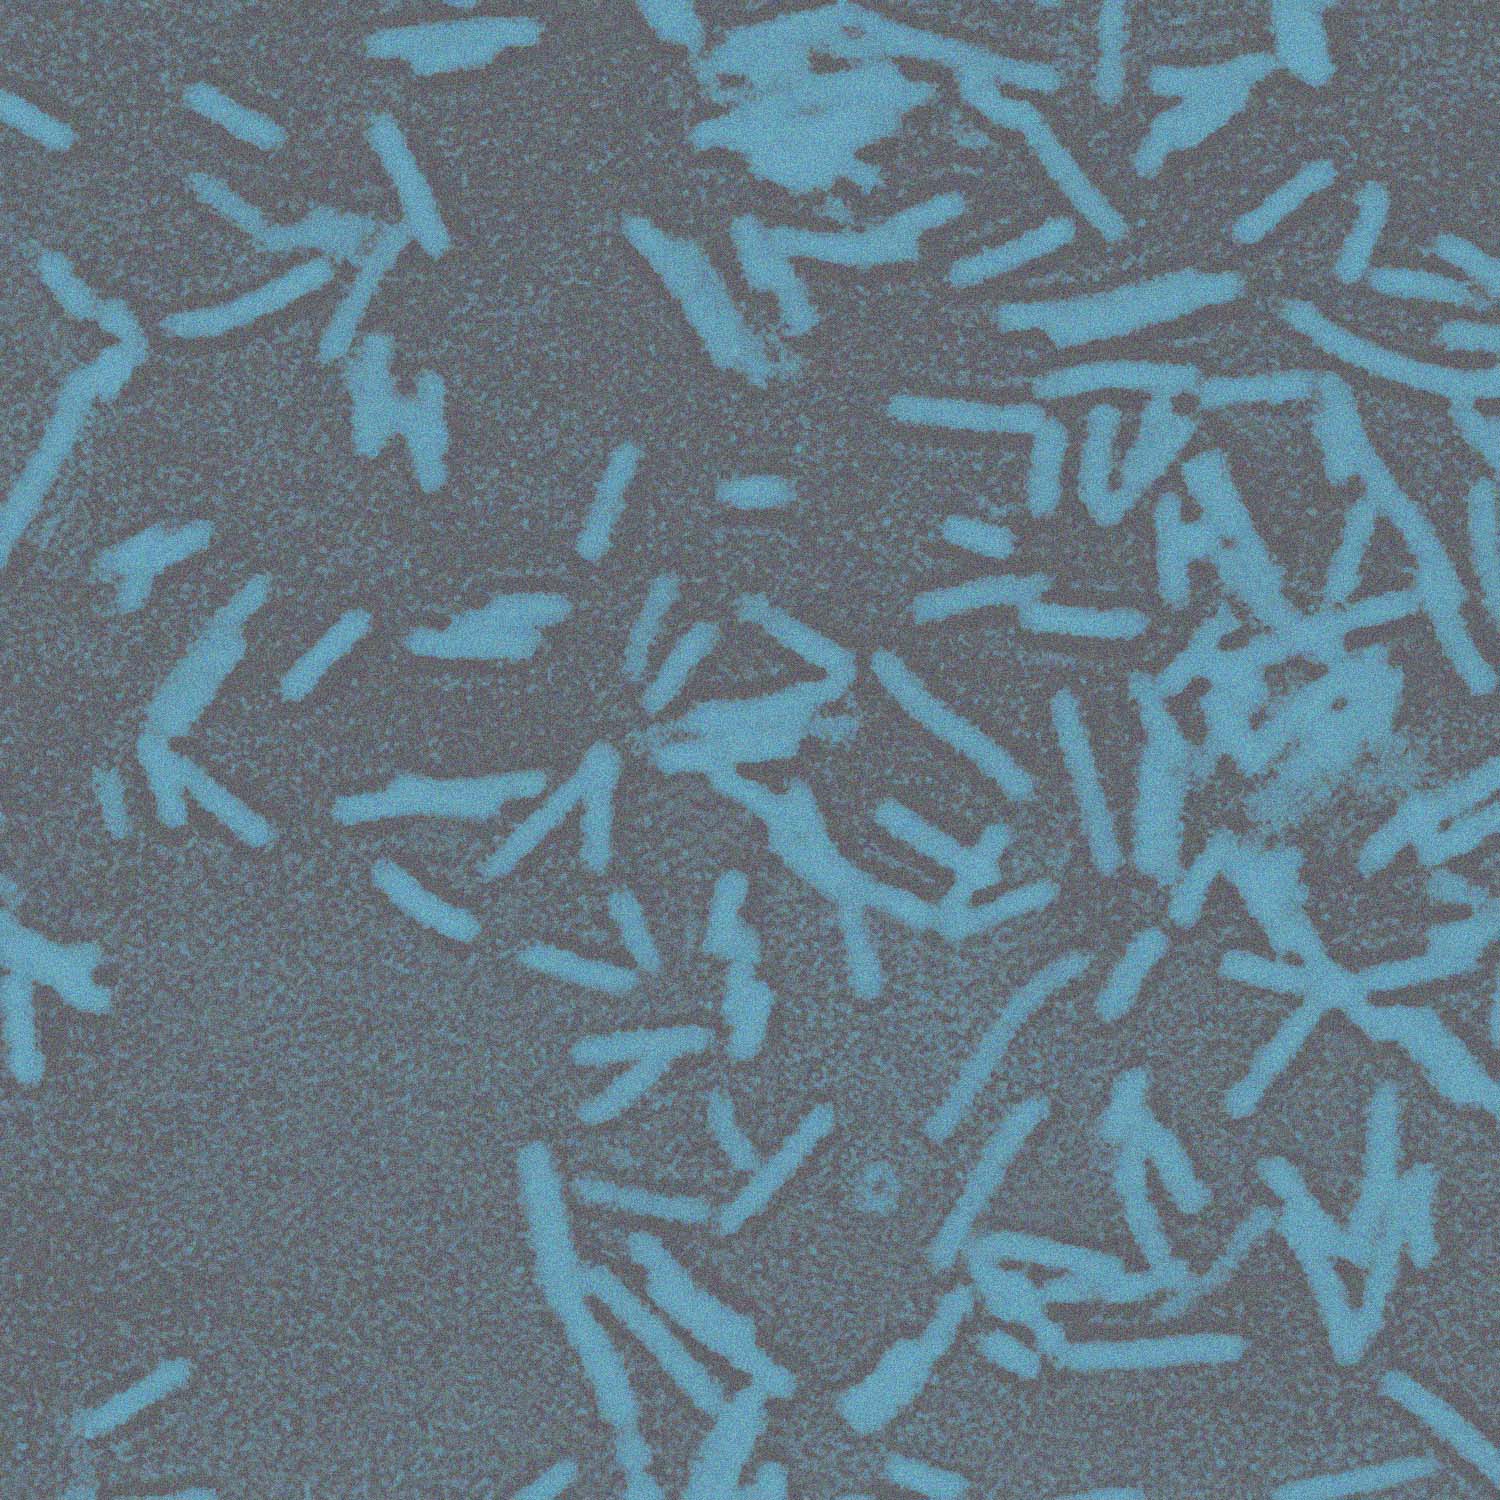 Microscopic image of Bacteroides fragilis